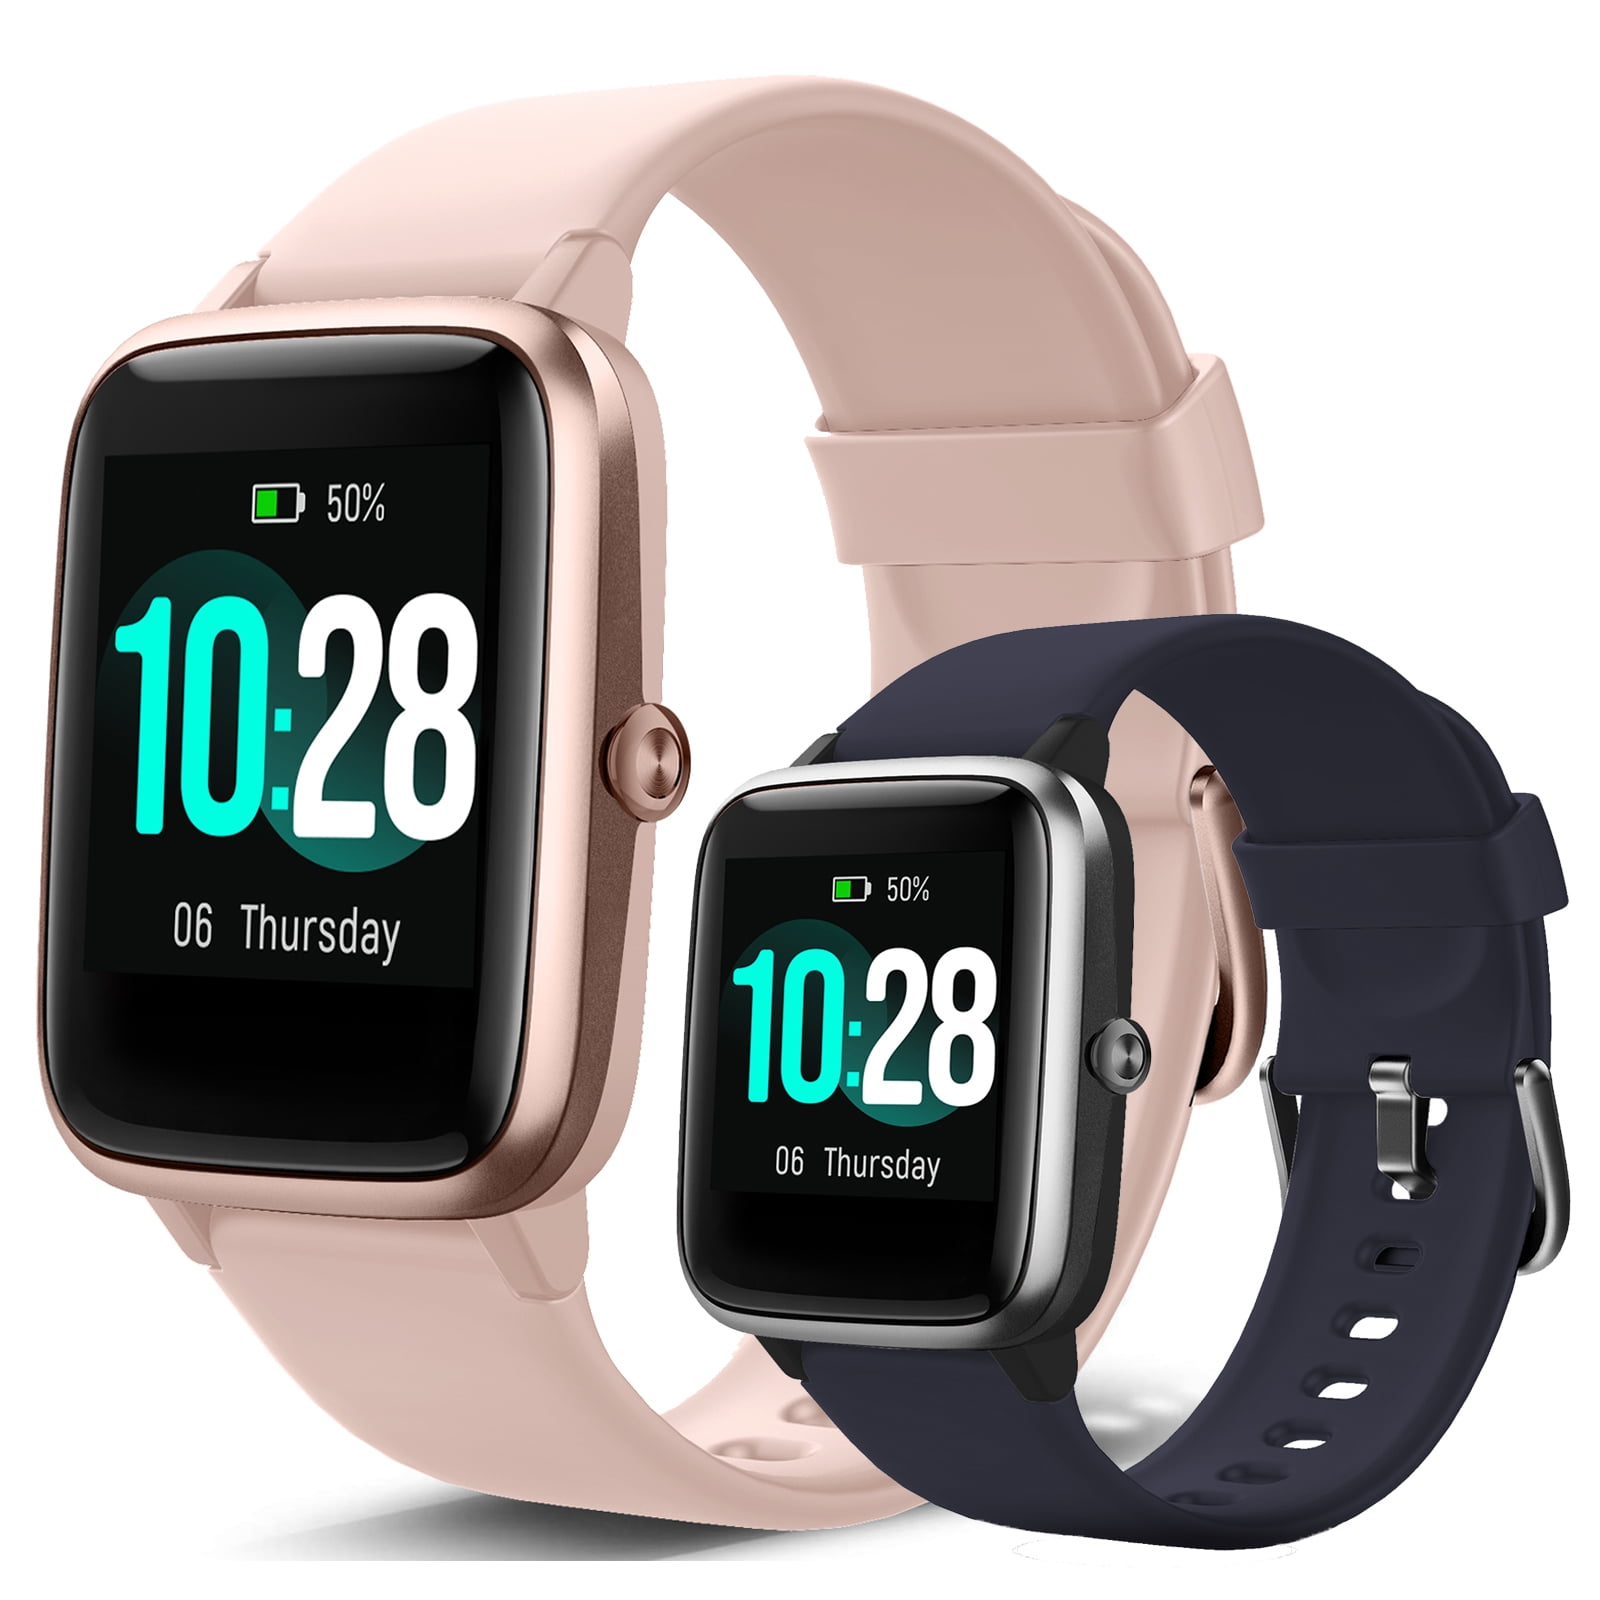 Smart Watch Compatible Android iOS iPhone Samsung Phones, IP68 Swimming Waterproof Smartwatch Fitness Fitness Watch Rate Monitor Sleep Tracker Smart Watches for Couples Lover - Walmart.com